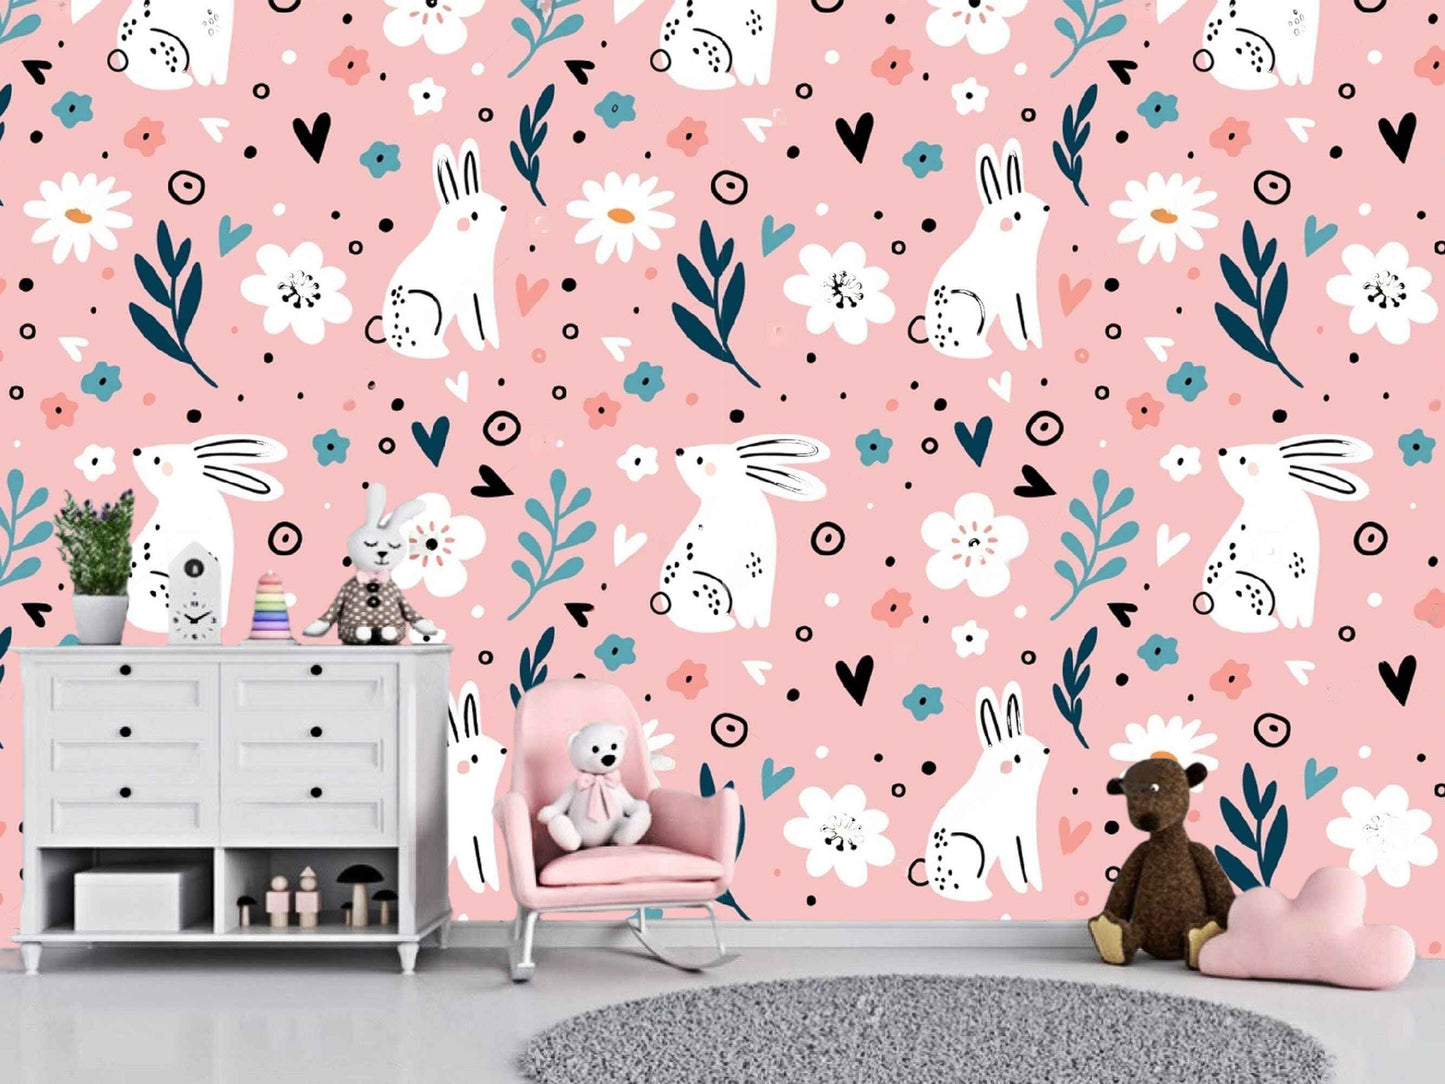 Whimsical rabbit pattern wallpaper mural, creating a delightful and serene ambiance.